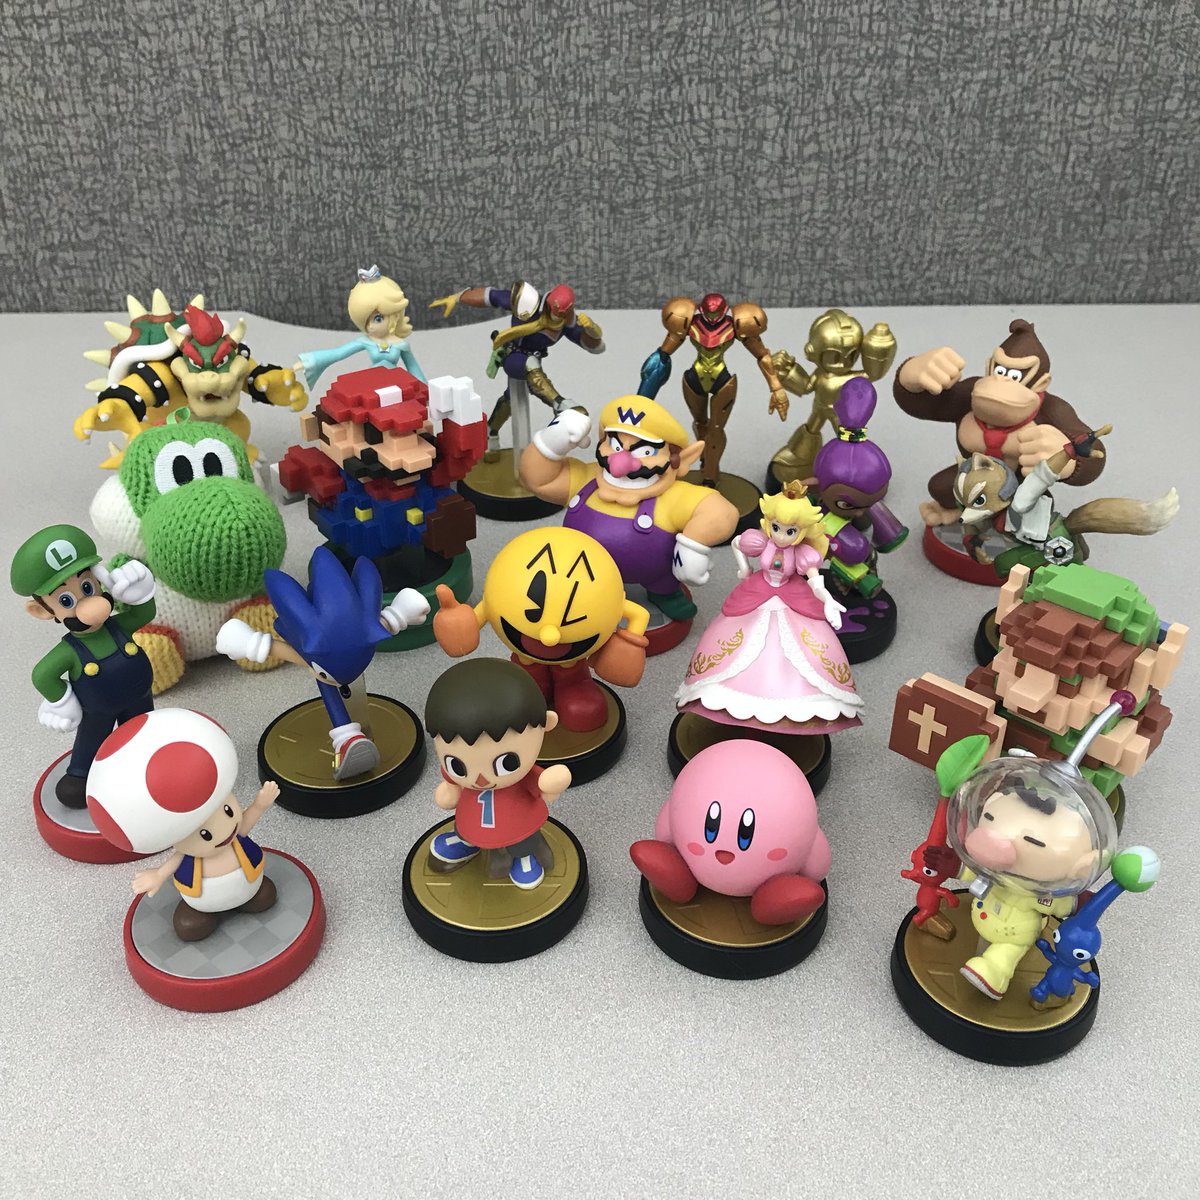 Brought some #amiibo to work for a coworker to get #mii outfits for #MarioKart8Deluxe. #NintendoSwitch #toad #villager #kirby #olamar #yoshi #pacman #princespeach #link #luigi #sonic #mario #wario #inklingboy #foxmcloud #bowser #rosalina #captainfalcon #samus #donkeykong #megaman